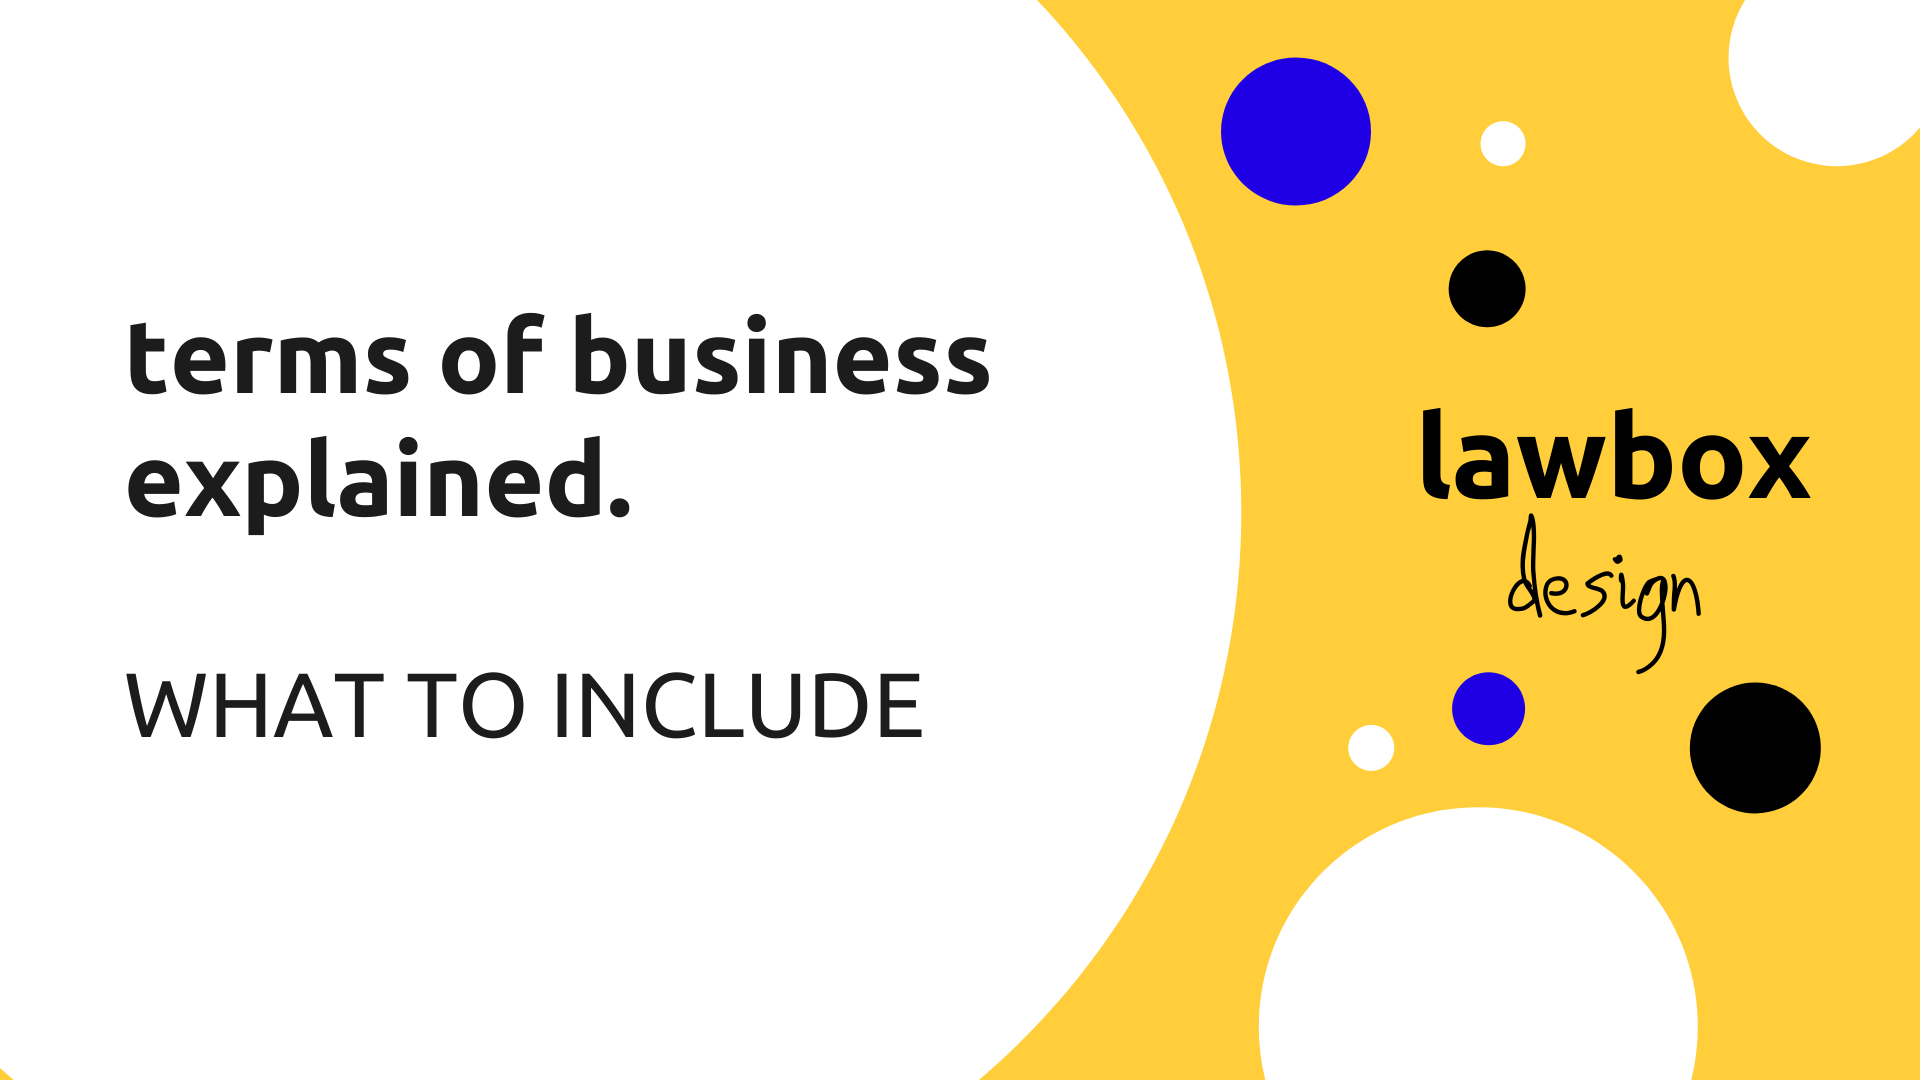 Lawbox-design-terms-of-business-explained-download